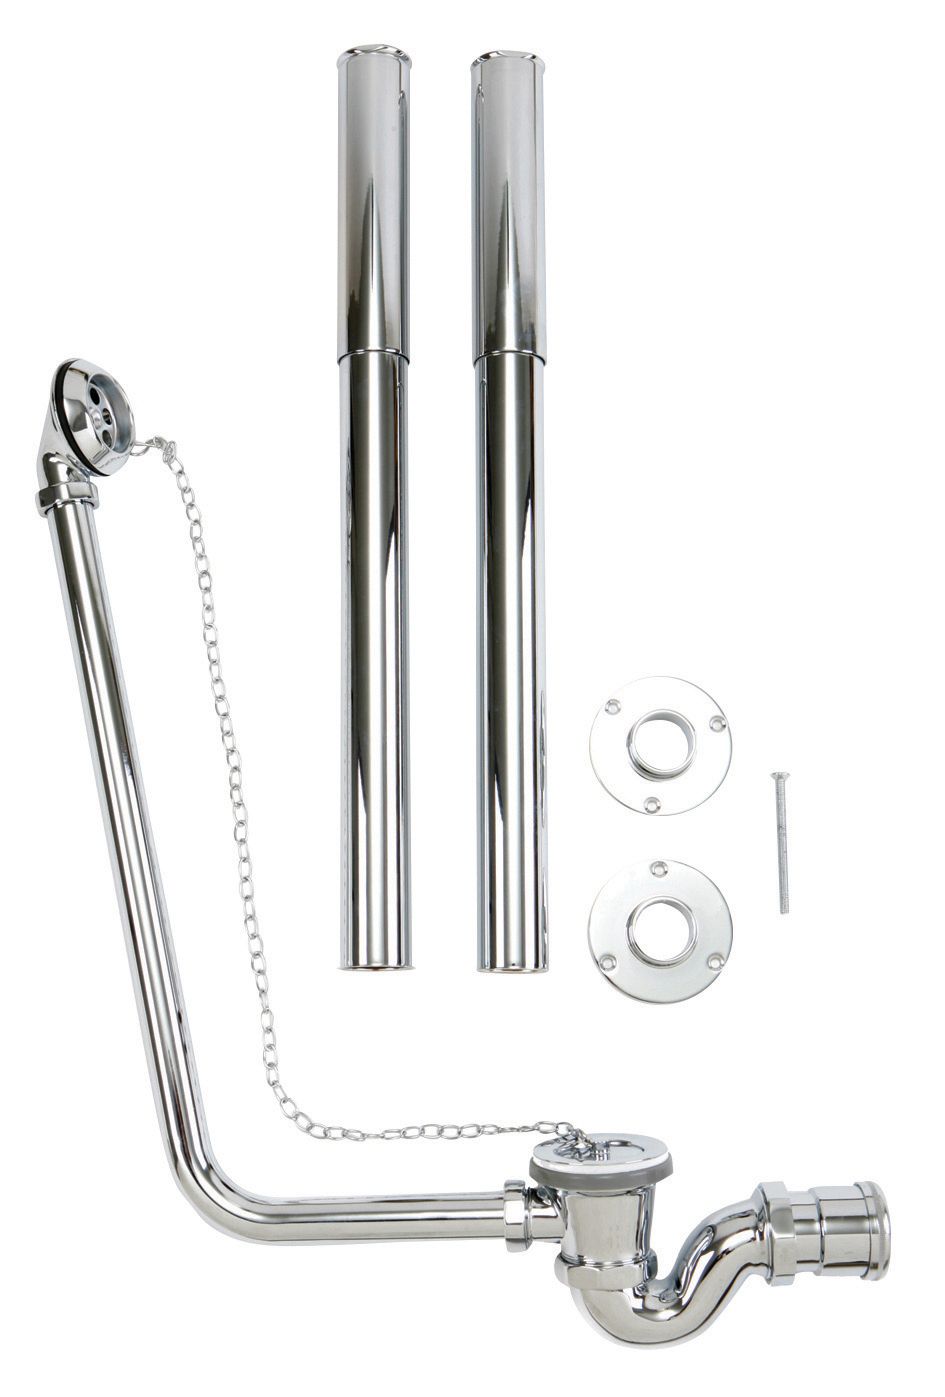 Wickes Roll Top Bath Waste Accesories Packages - Chrome